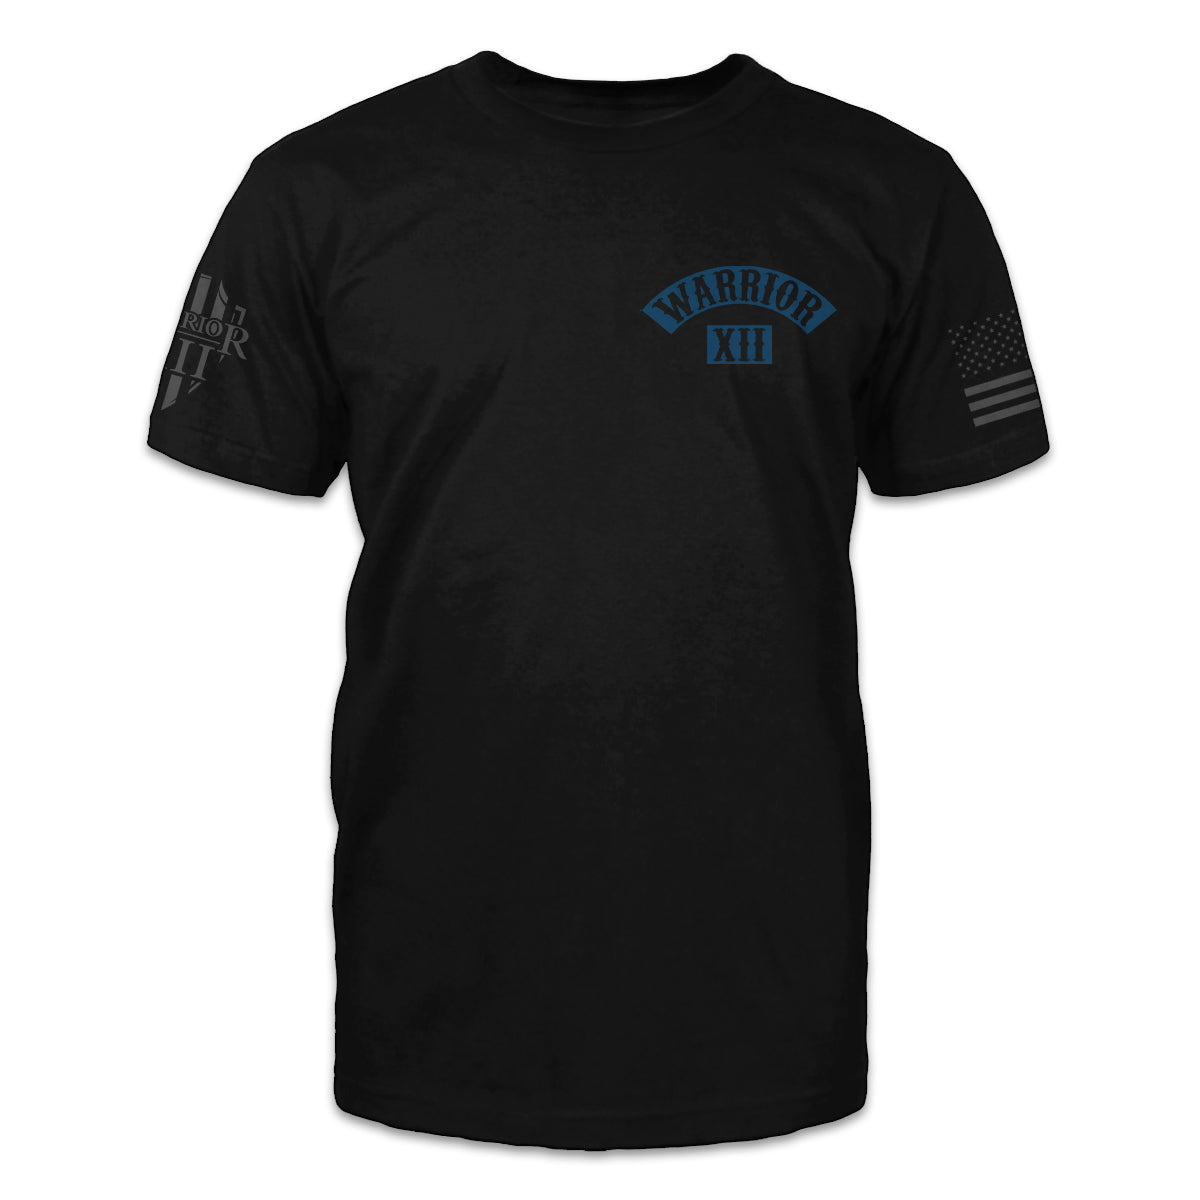 A black t-shirt with the words Warrior XII printed on the front of the shirt.